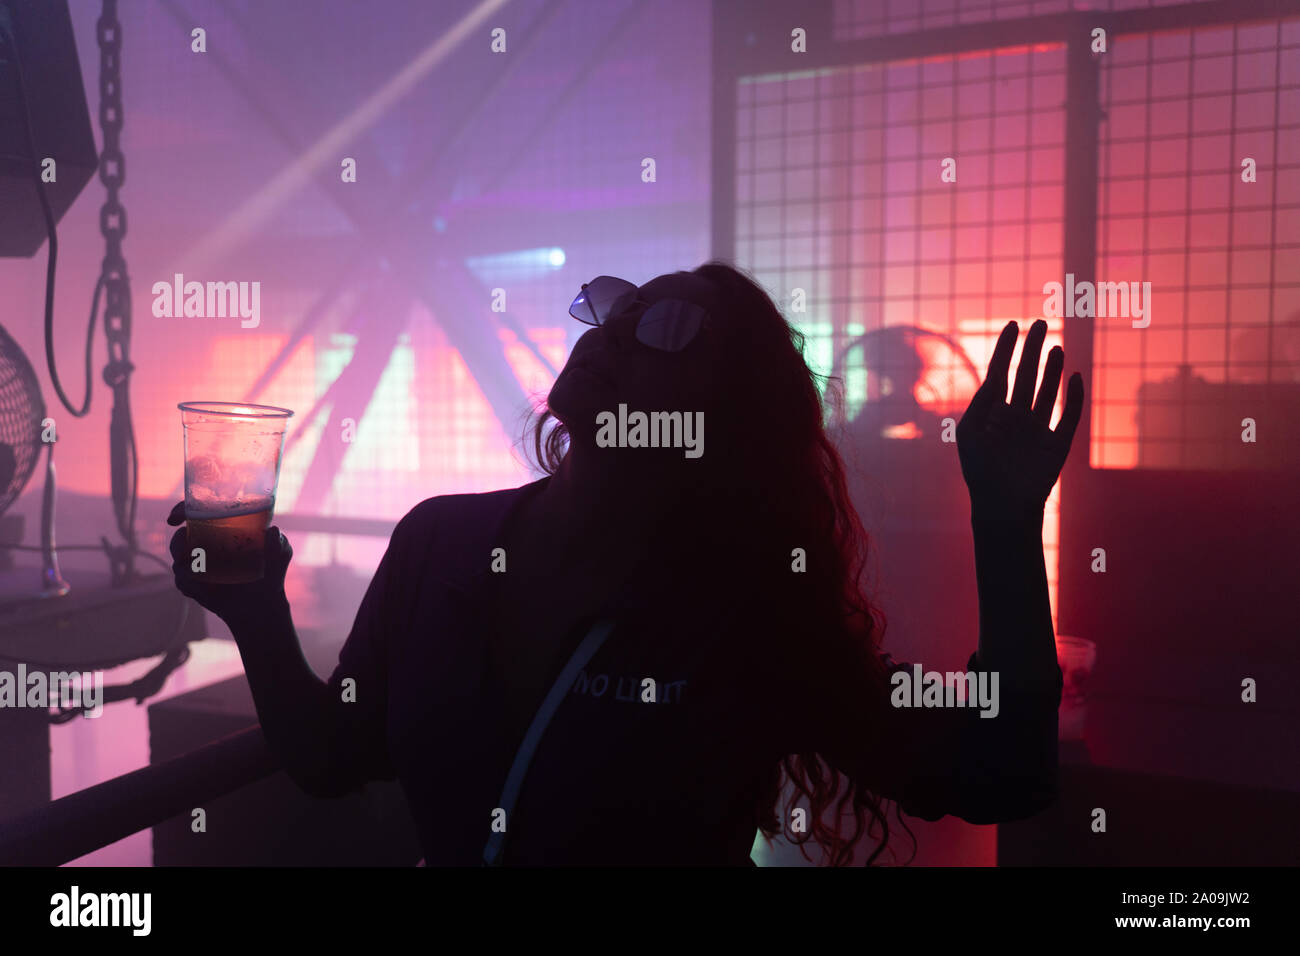 Dancing young woman silhouette at techno club Stock Photo